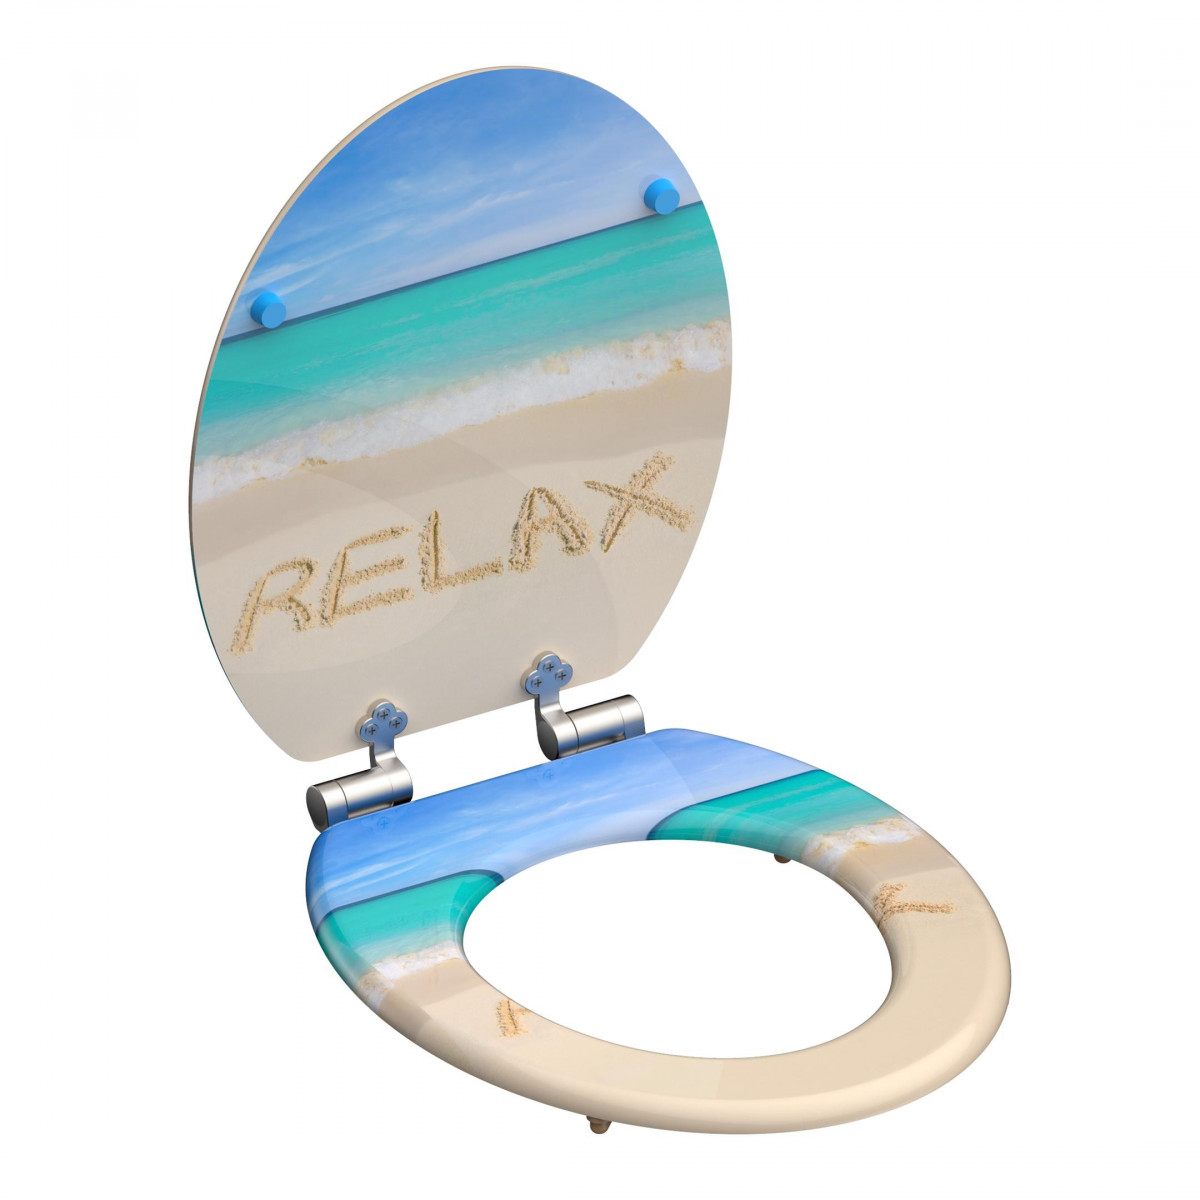 MDF Toilet Seat RELAX with Soft Close